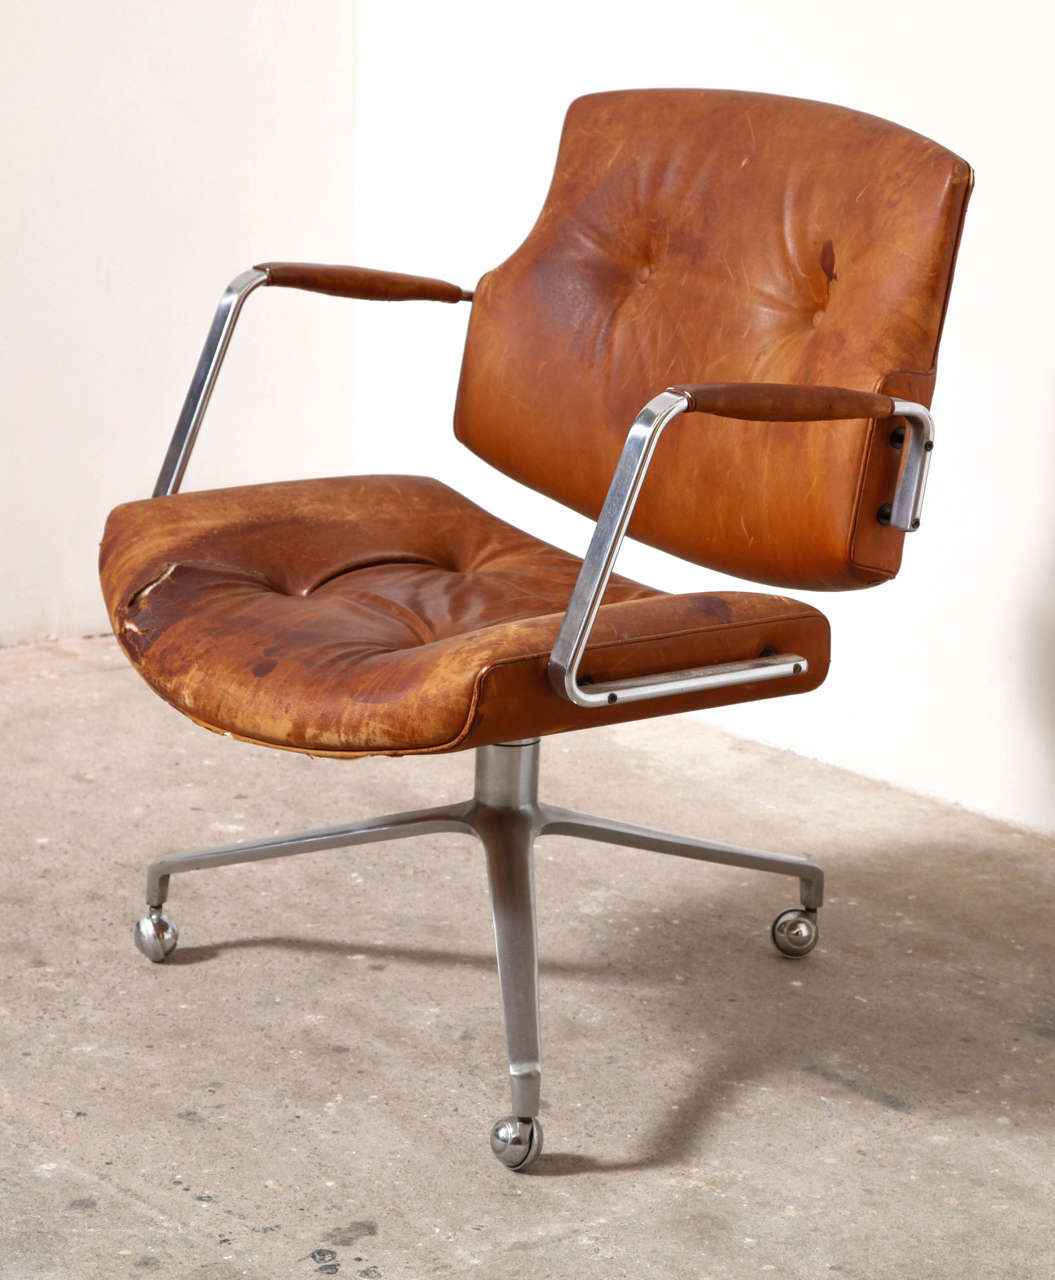 Original lounge or desk chair. Upholstered in cognac leather, with patina, polished chromed steel swivel tripod on castors. Produced by Kill International.